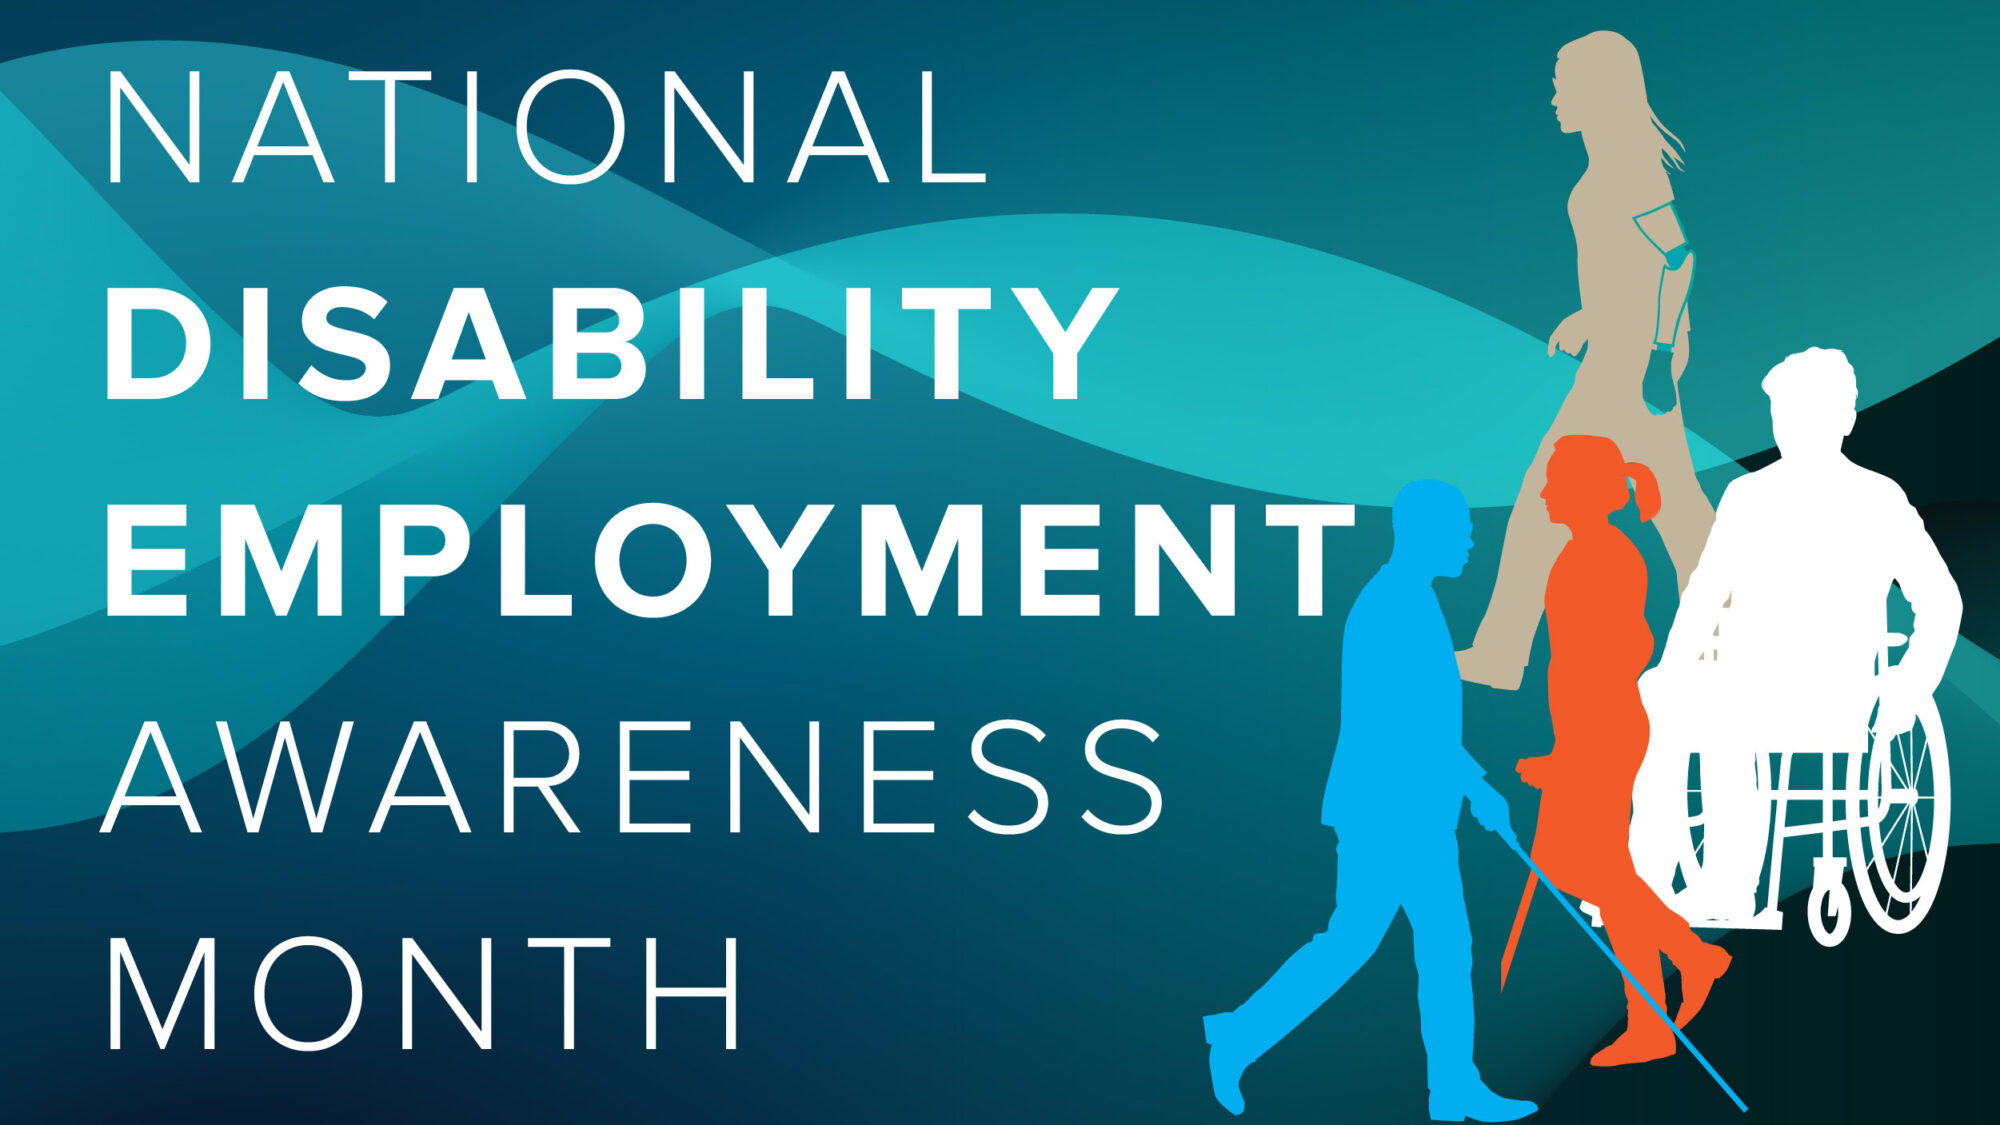 Text that reads, "National Disability Employment Awareness Month" with drawings of disabled people.